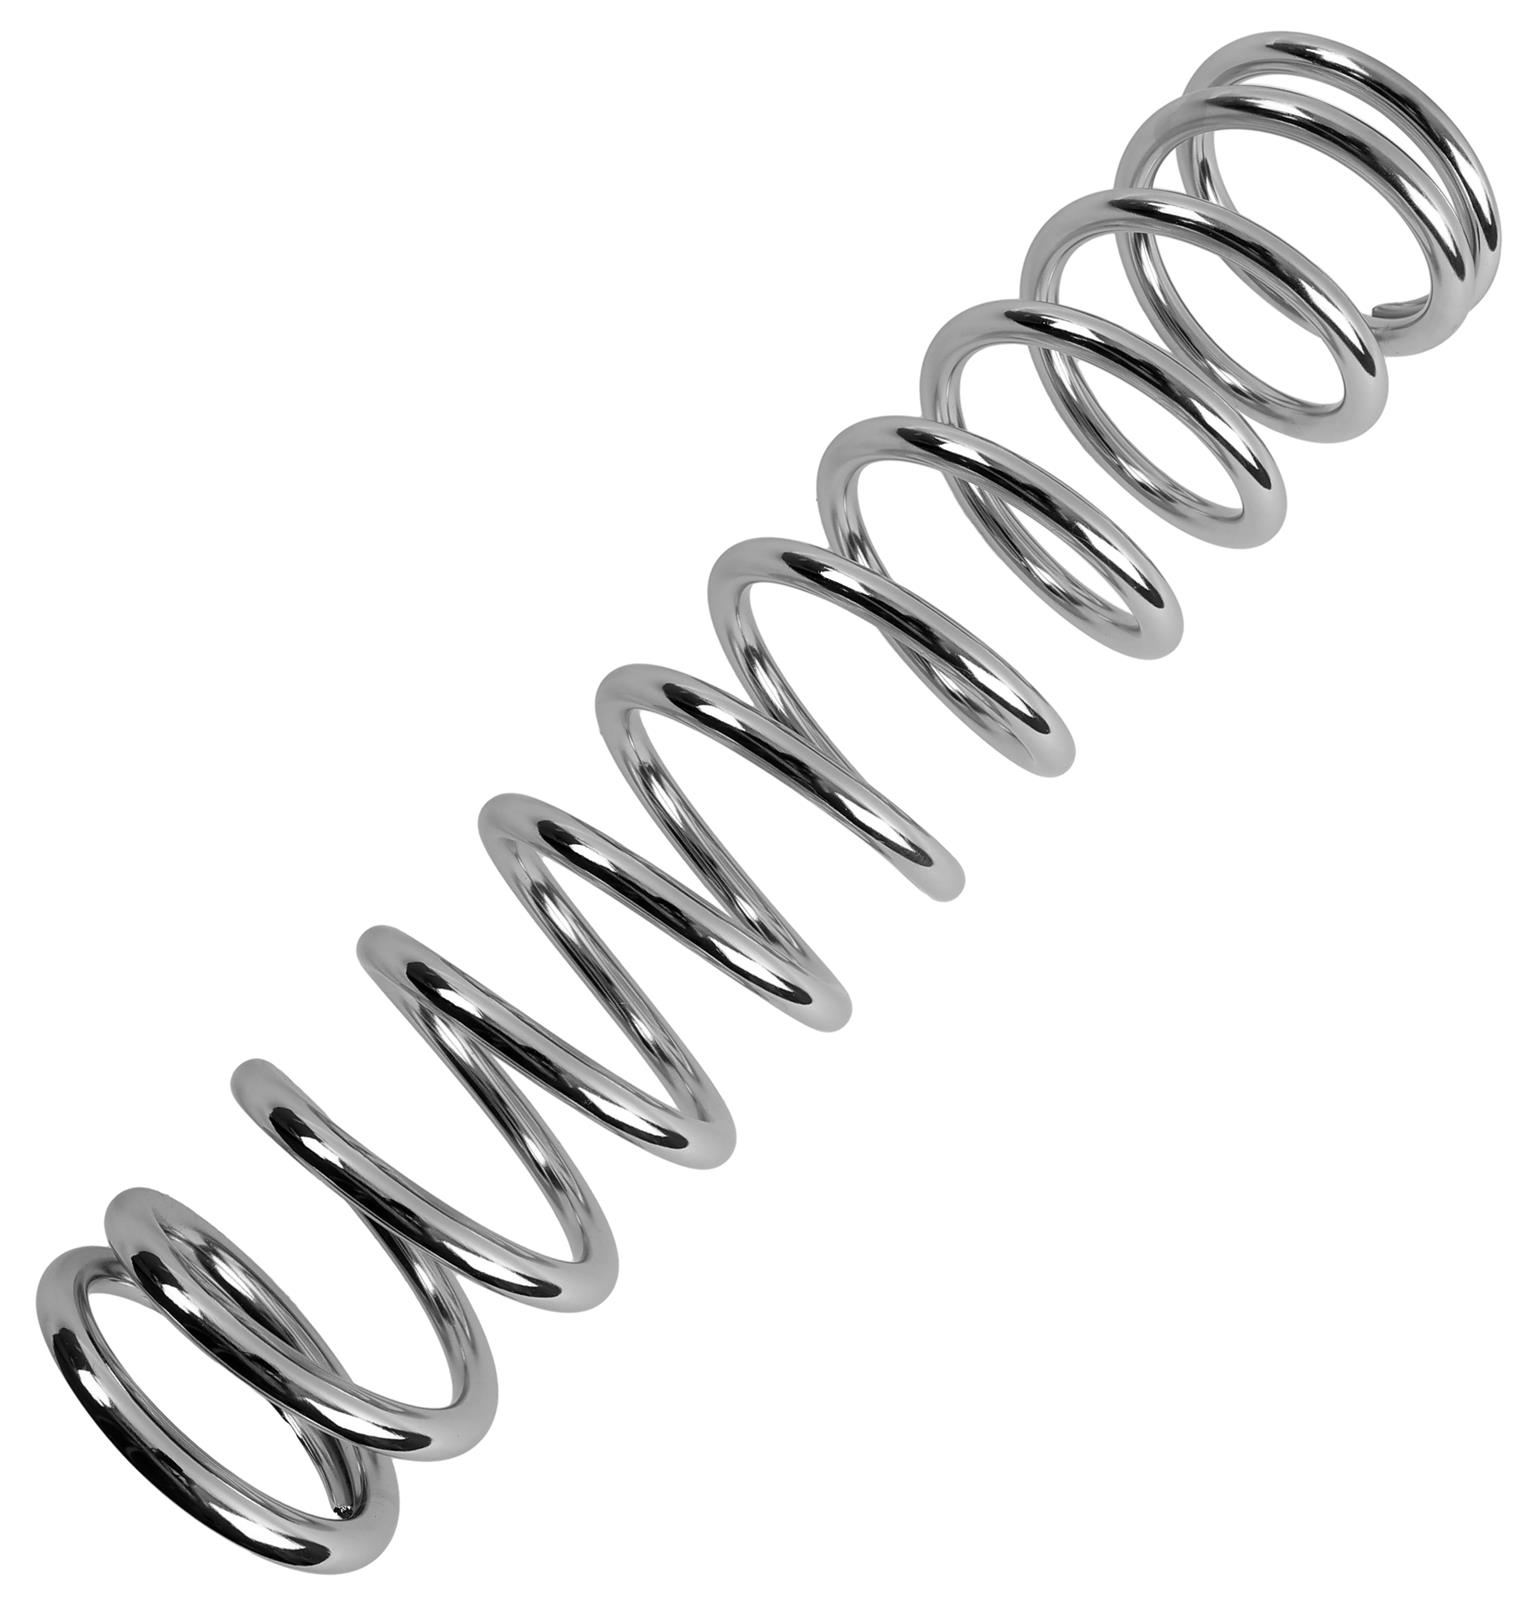 AFCO Racing 24080CR AFCO Racing AFCOIL Coilover Springs | Summit Racing